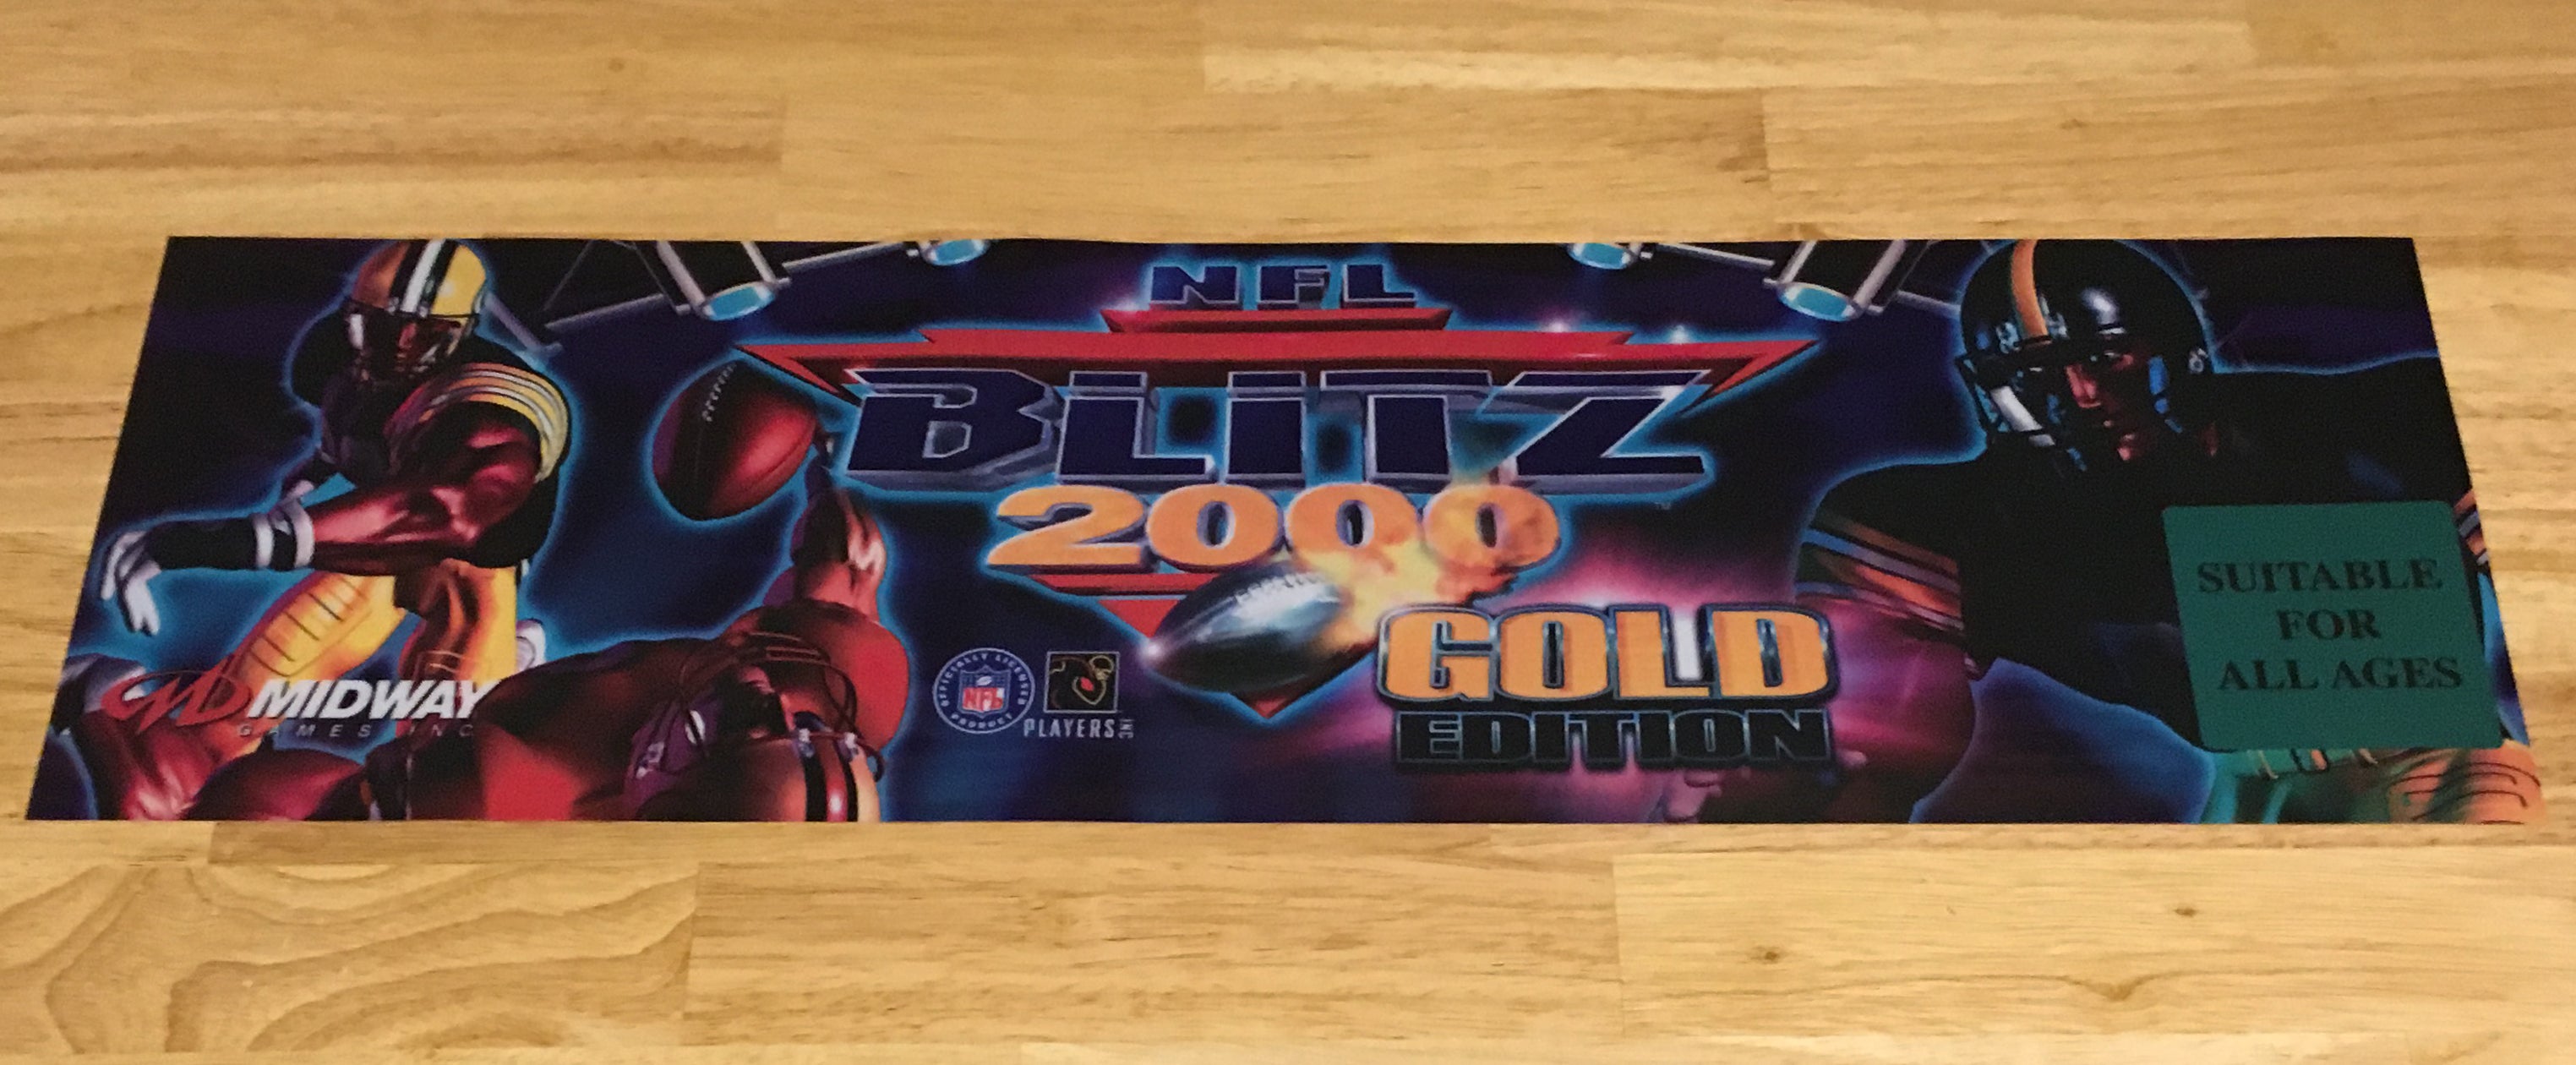 NFL Blitz 2000 Gold Marquee